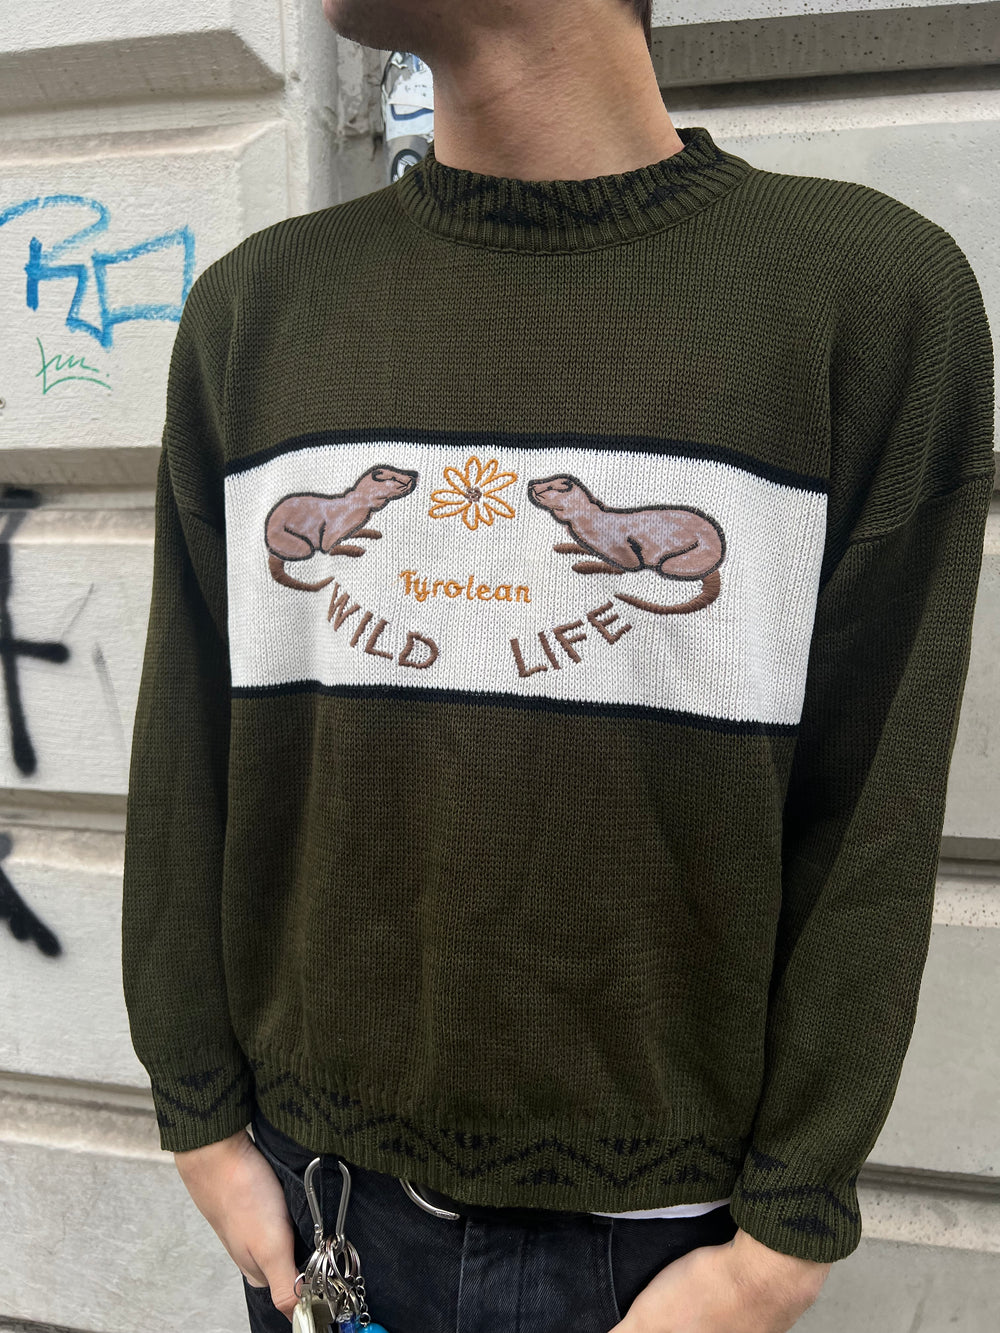 Vintage 80s Wild Life Tyrolean Knit Sweater (S)